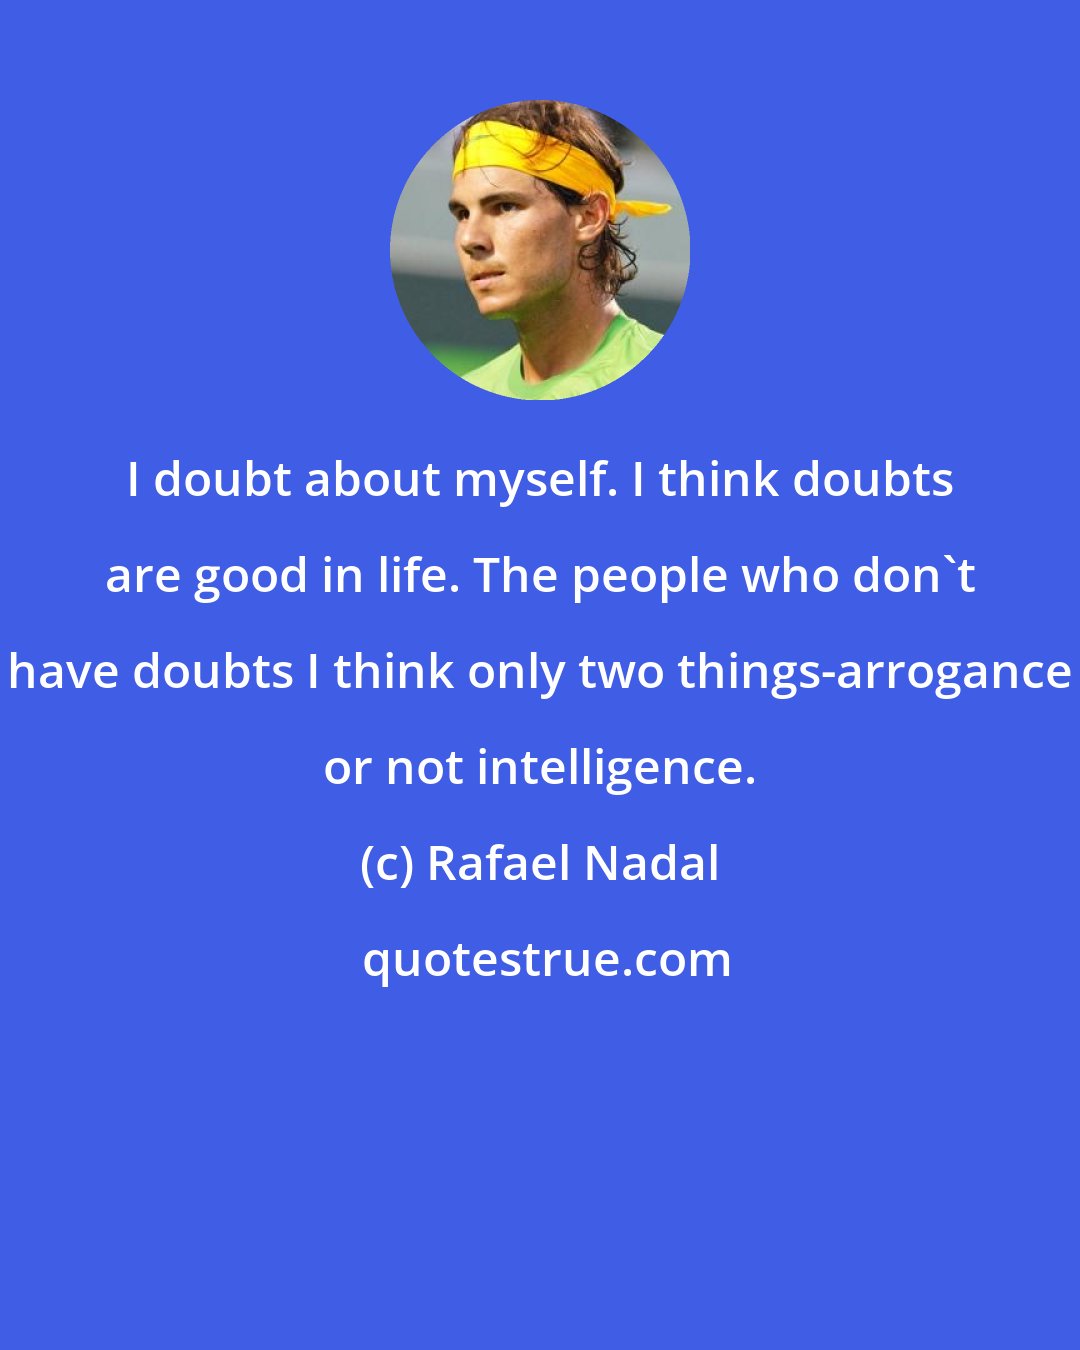 Rafael Nadal: I doubt about myself. I think doubts are good in life. The people who don't have doubts I think only two things-arrogance or not intelligence.